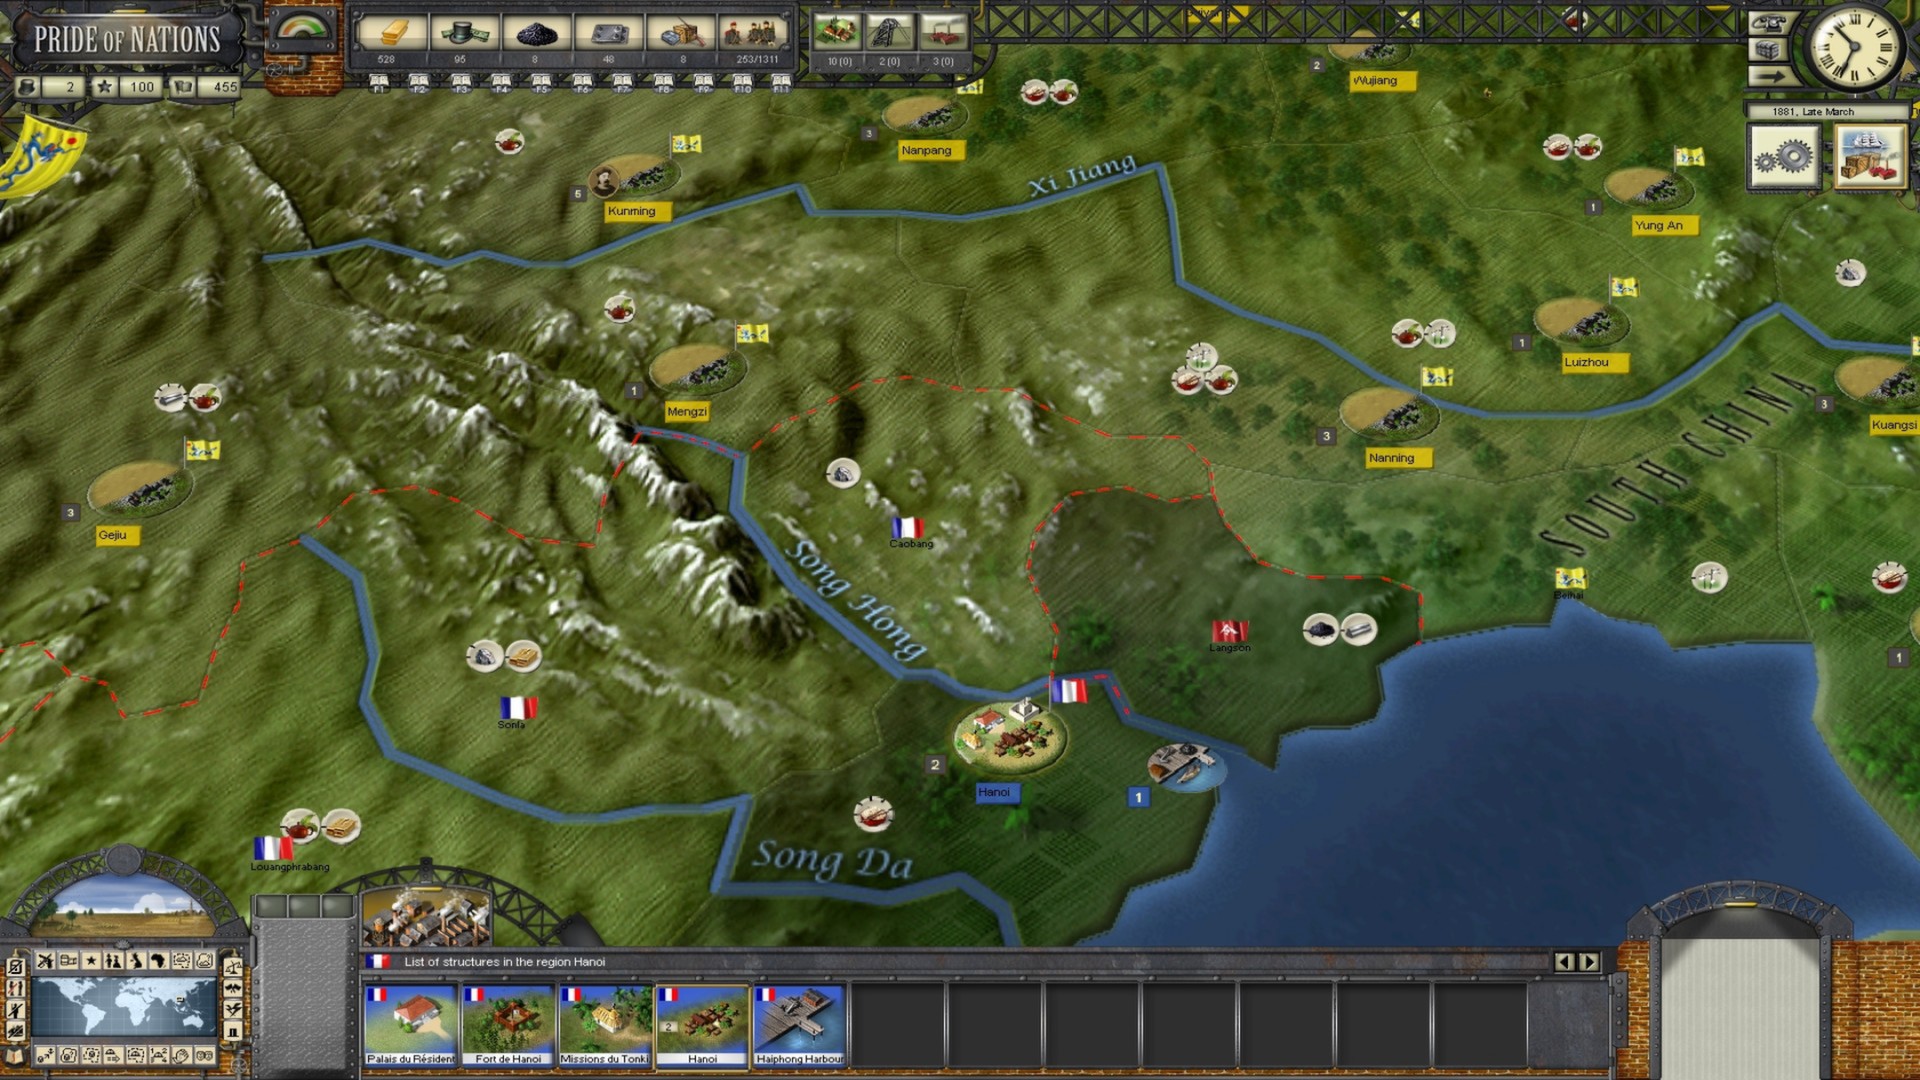 Pride of Nations - The Scramble for Africa DLC Steam CD Key $4.38